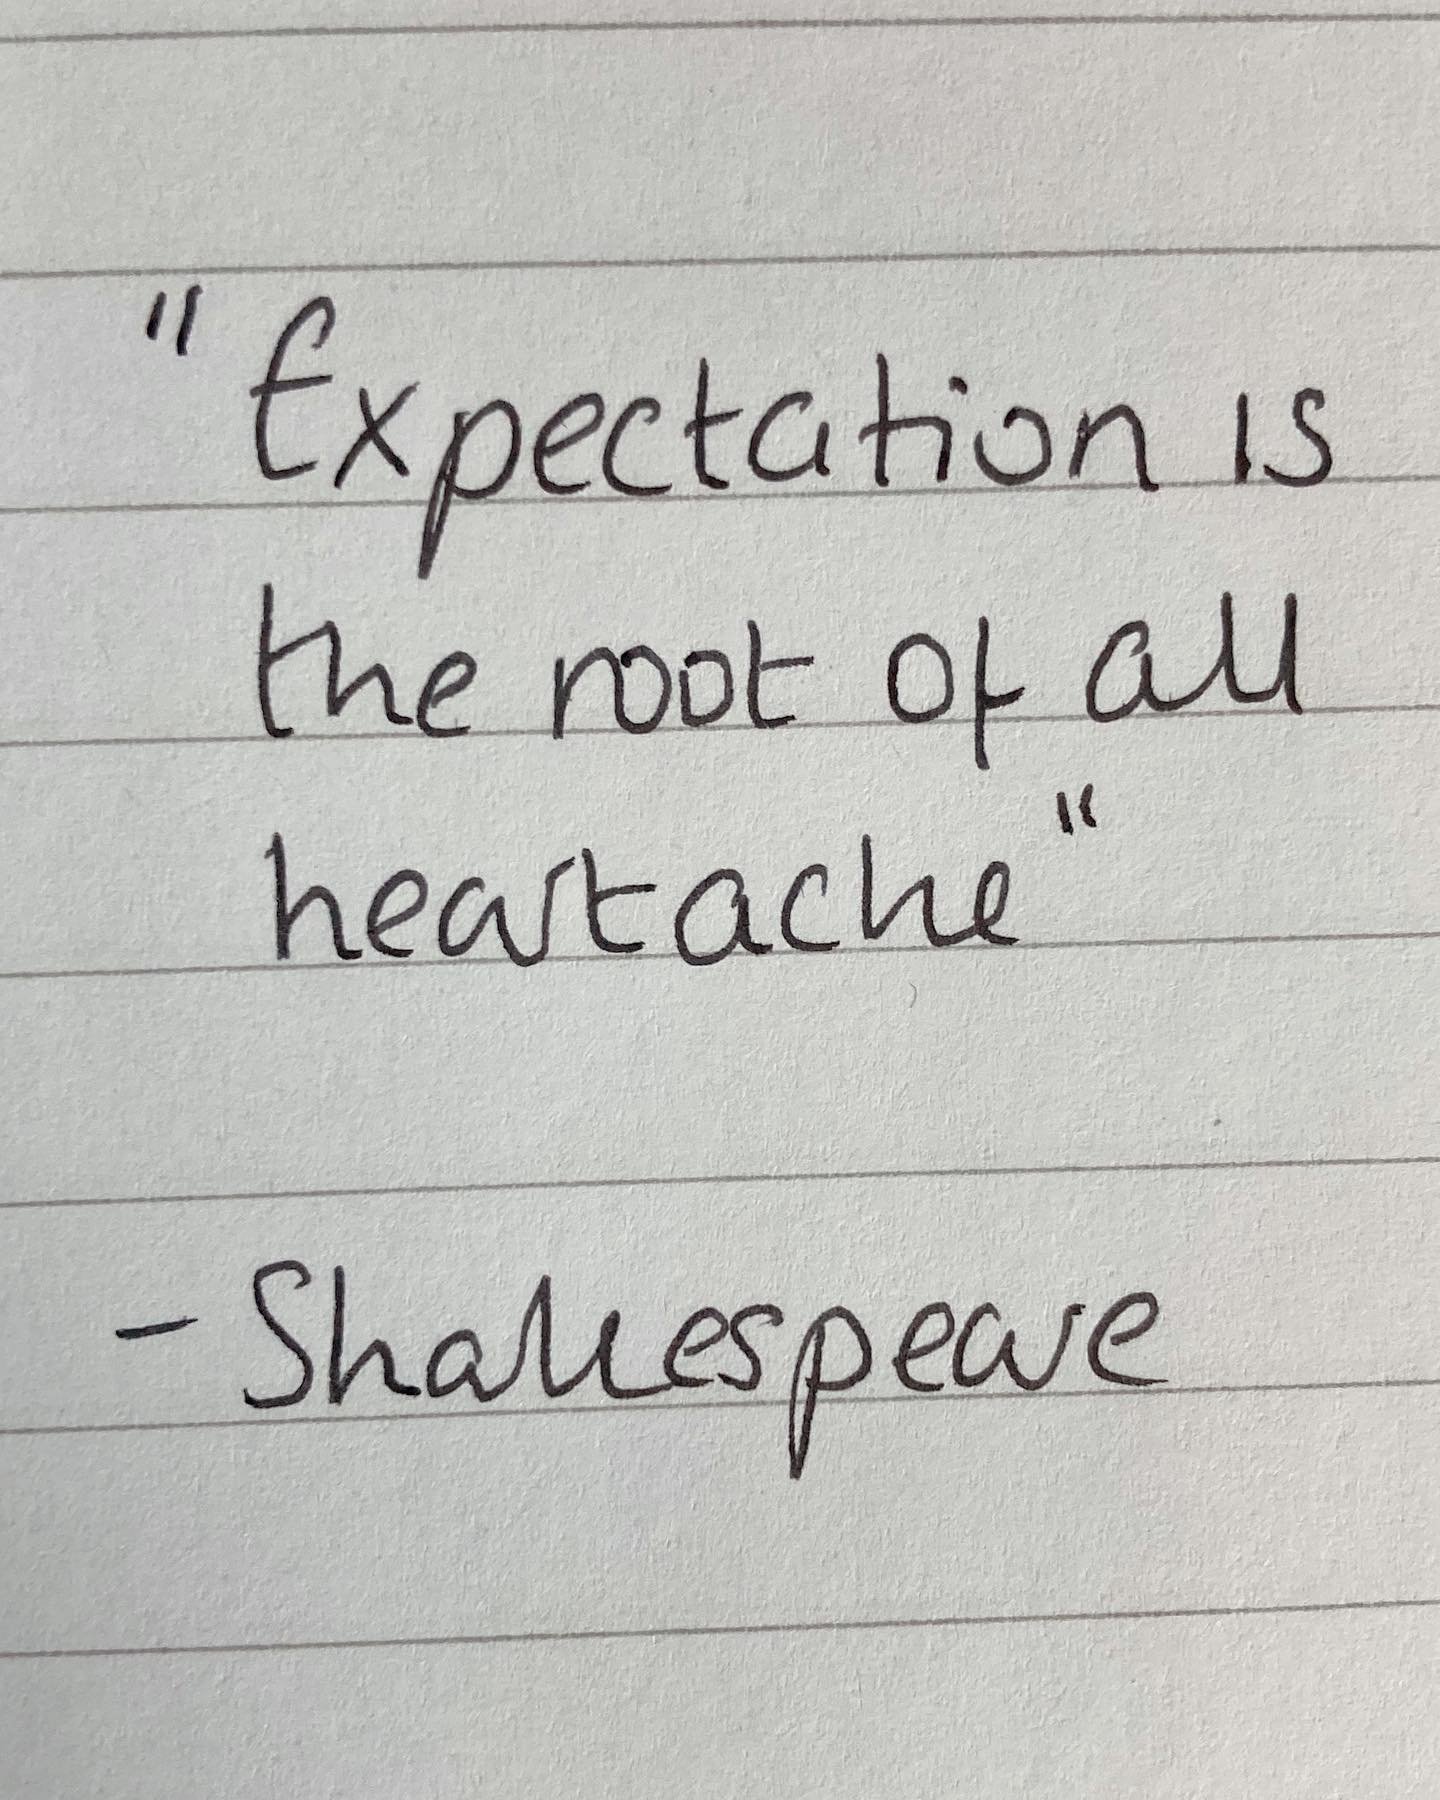 &ldquo;Expectation is the root of all heartache&rdquo; 
-William Shakespeare 

Our expectations might not meet reality. Shakespeare&rsquo;s statement could be applied to romantic relationship and wanting someone to change, which often leads to disapp